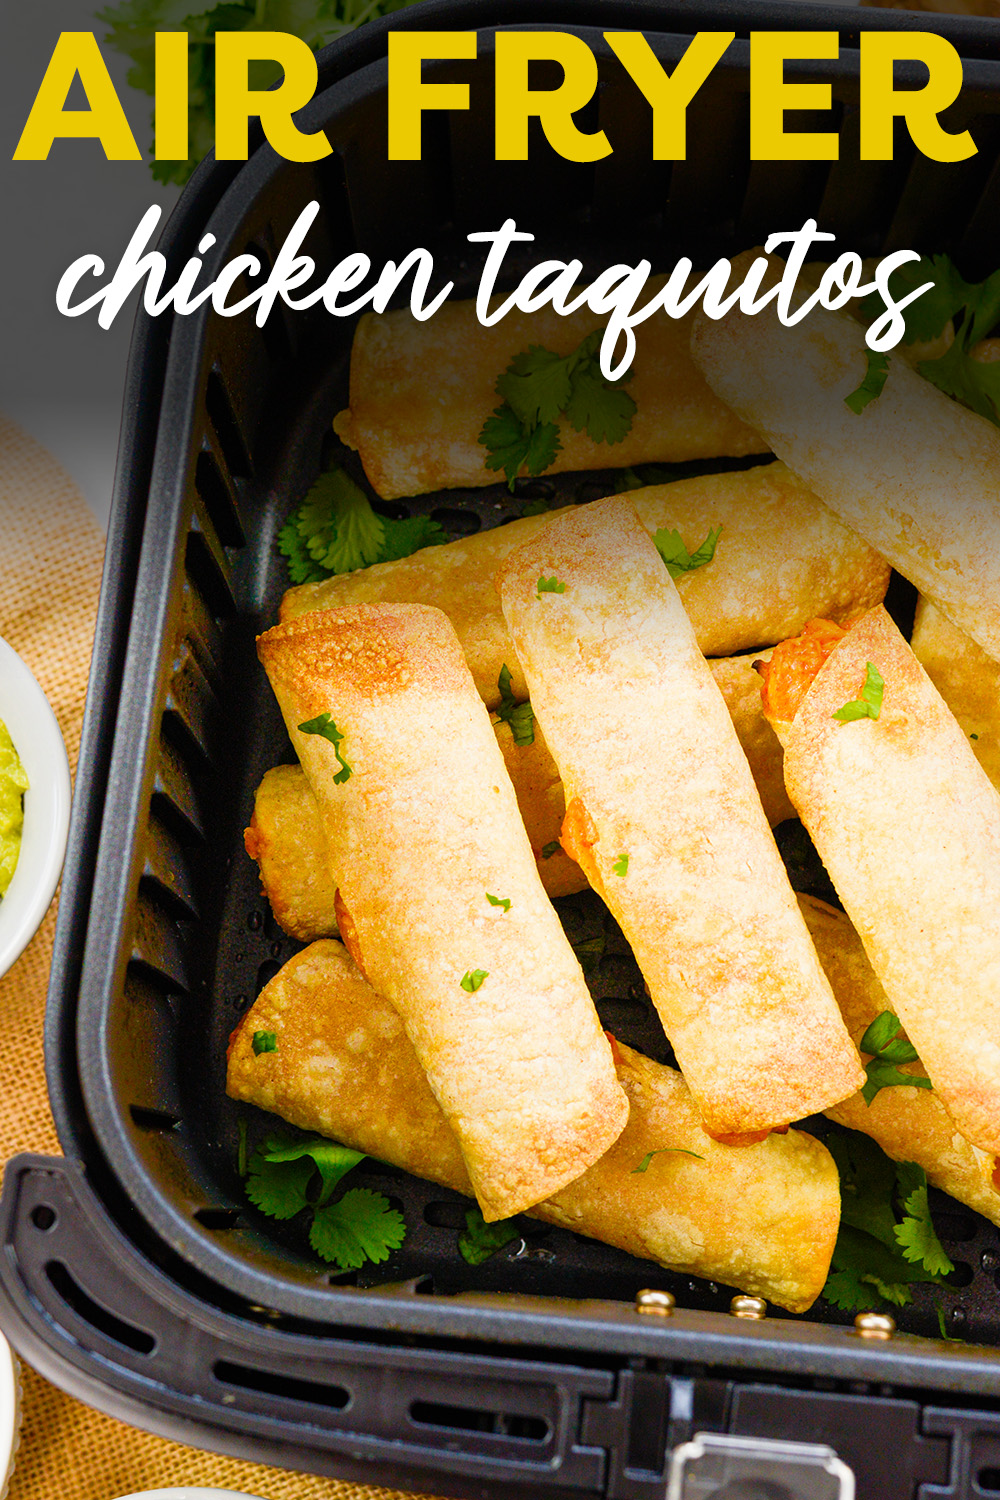 These crispy chicken taquitos are simple to make in the air fryer from scratch!  Dip them in your favorite sauce and go to town on them!